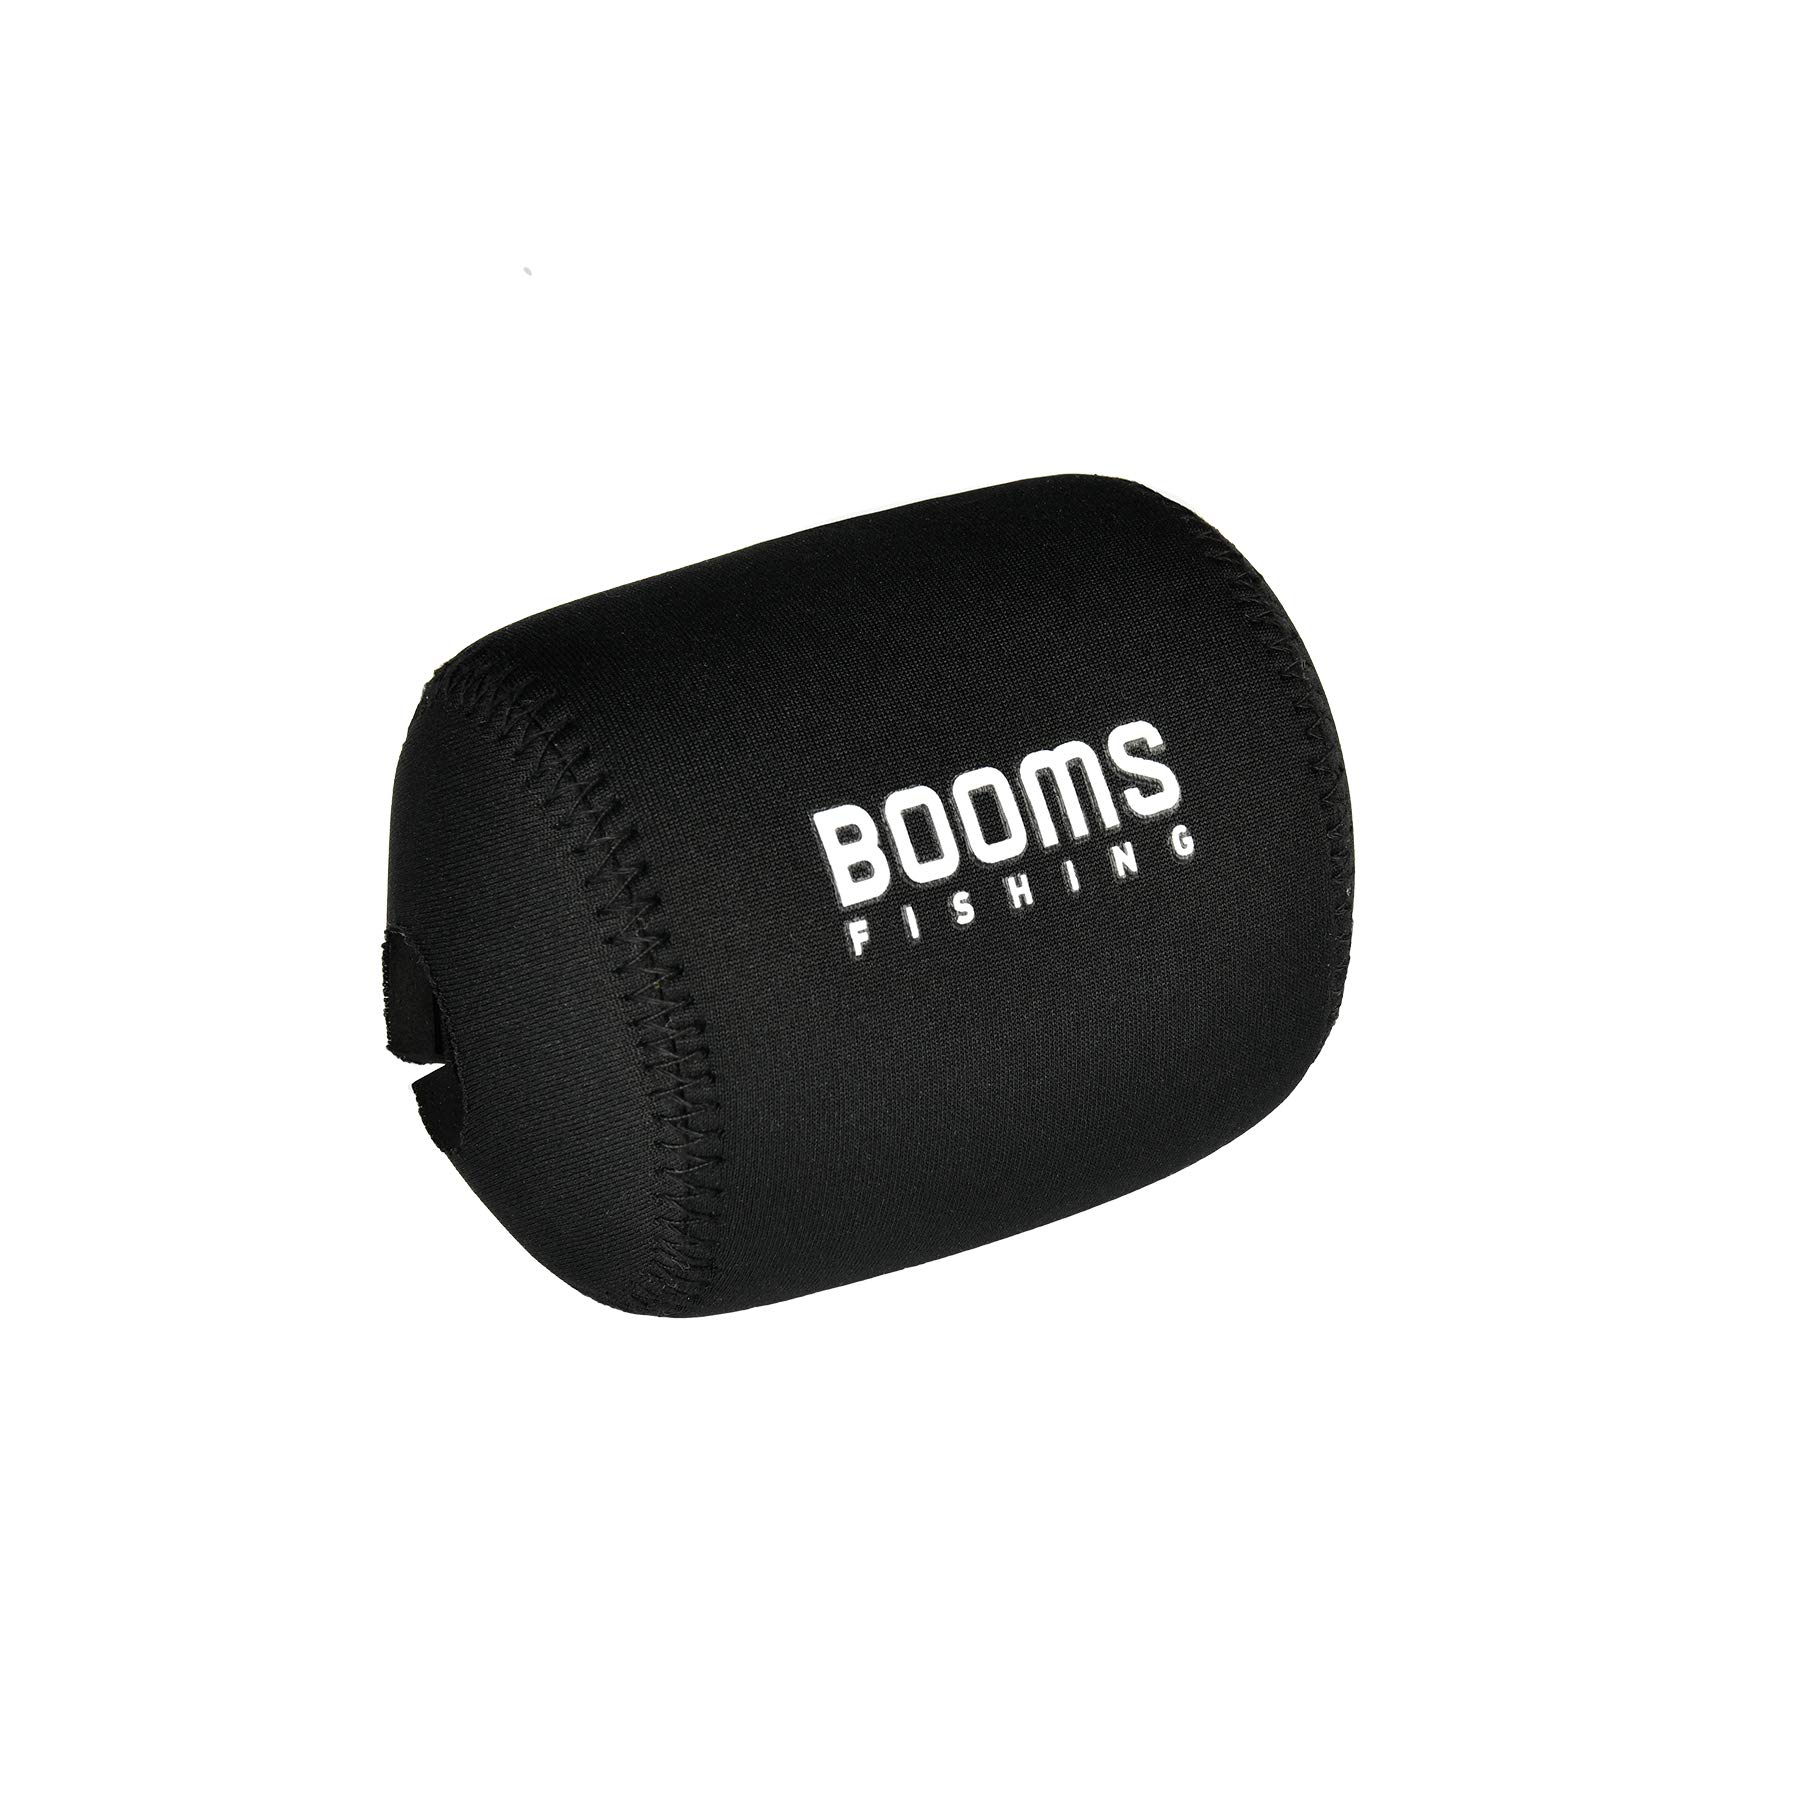 Booms Fishing RC1 Neoprene Reel Cover, Round Baitcasting Reels Cover, Fit  for 50 100 200 300 400 800 1000 2000 3000 400010000 Conventional Reels,  S/M/L/XL Size XL (4.7 W x 3.7 D)